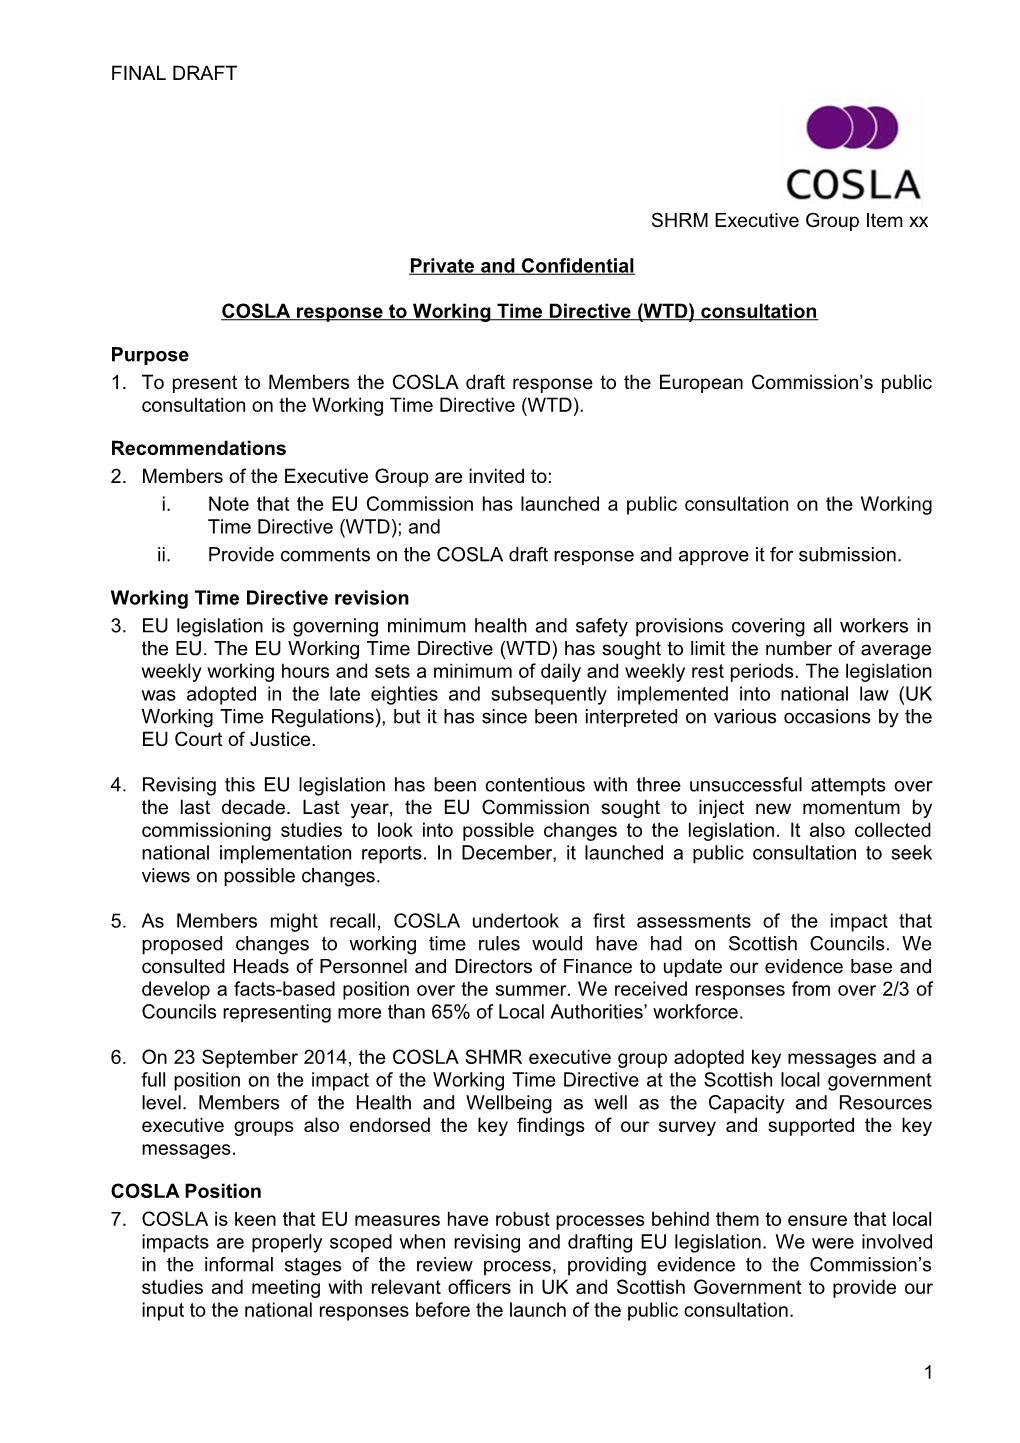 COSLA Response to Working Time Directive (WTD) Consultation